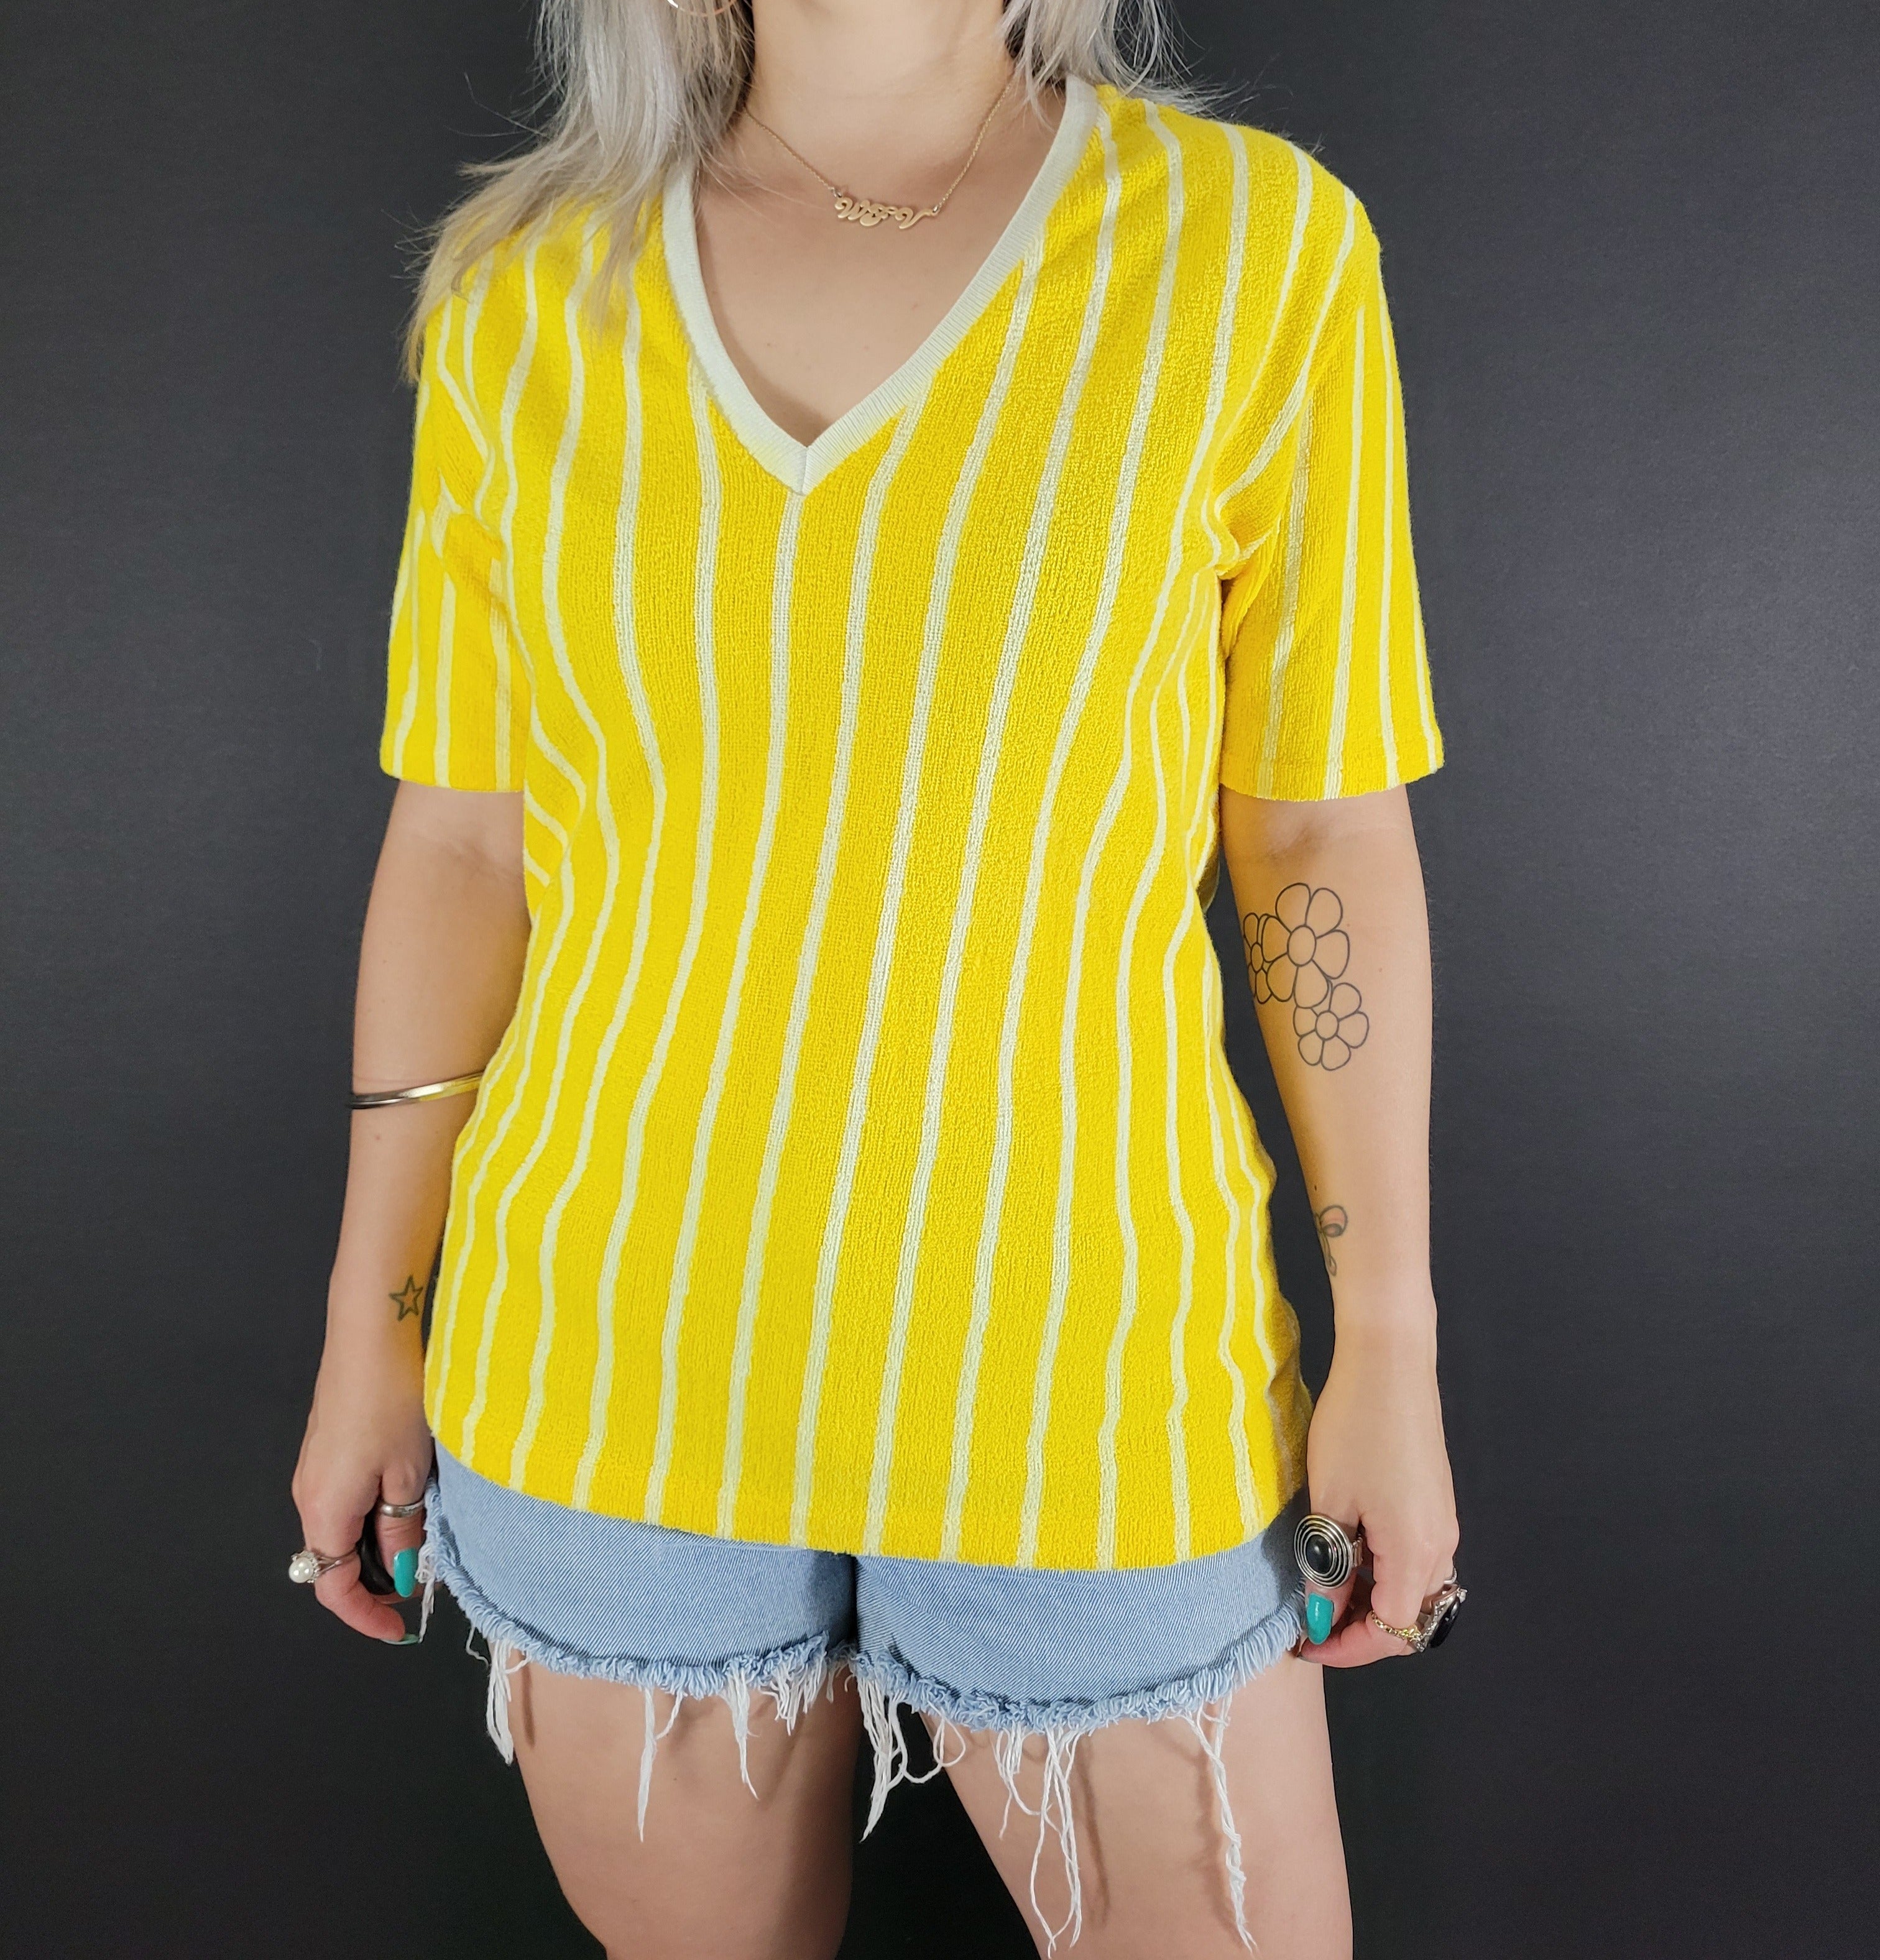 Vintage 60's Deadstock Striped Terry Cloth T-Shirt by White Stag